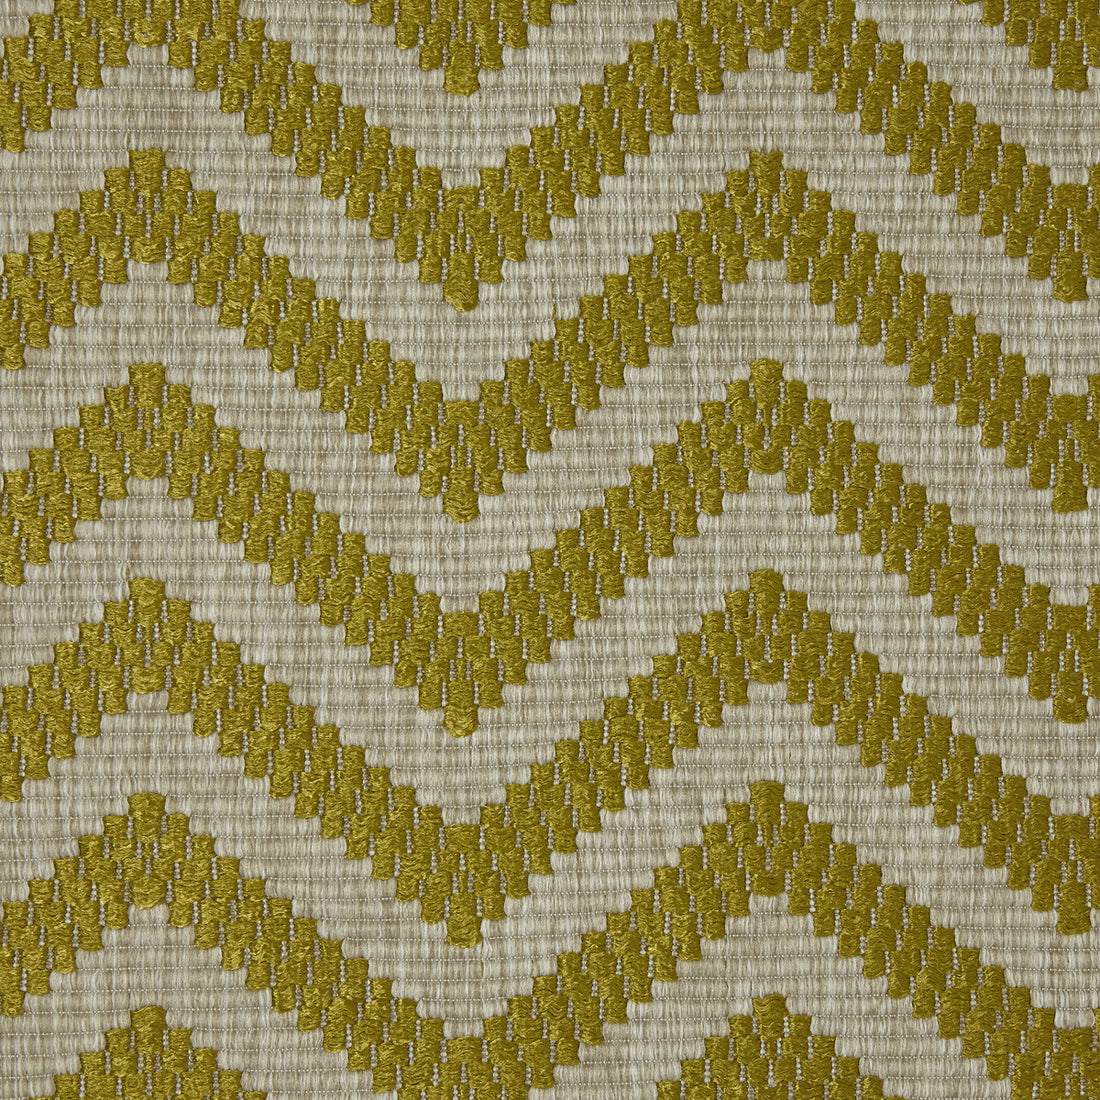 Marelle fabric in 5 color - pattern LZ-30347.05.0 - by Kravet Design in the Lizzo Indoor/Outdoor collection